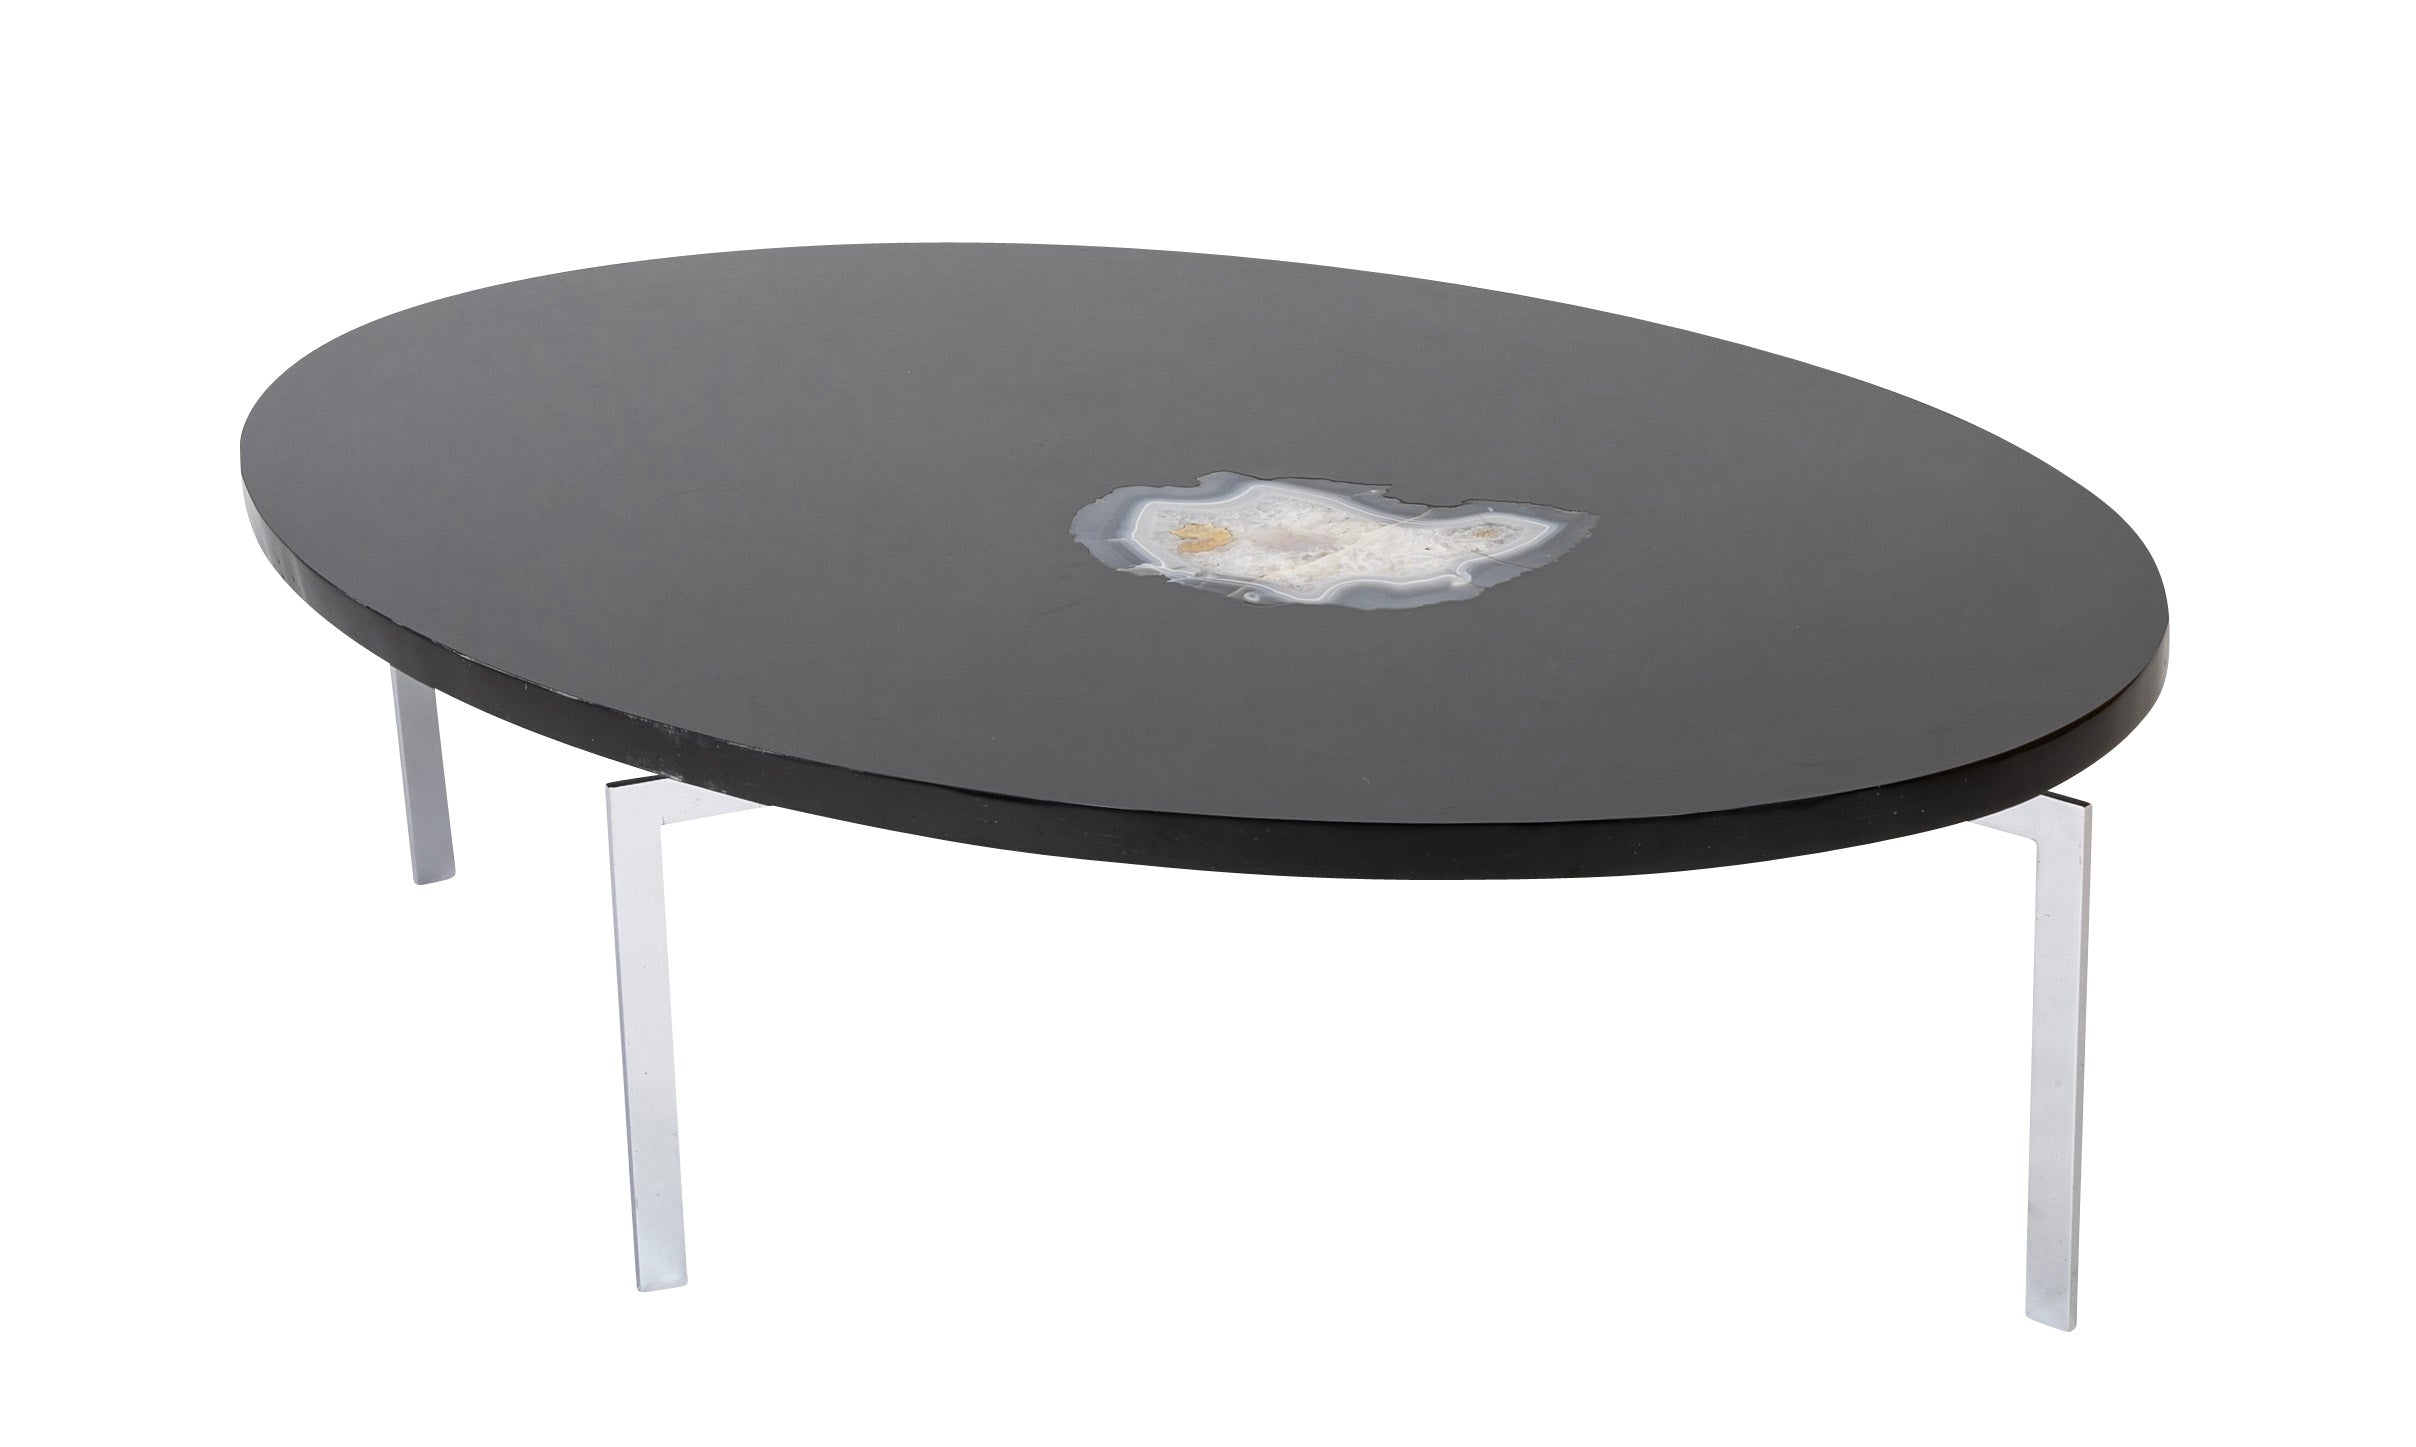 Philippe Barbier Oval Black Resin Coffee Table with Agate Insert